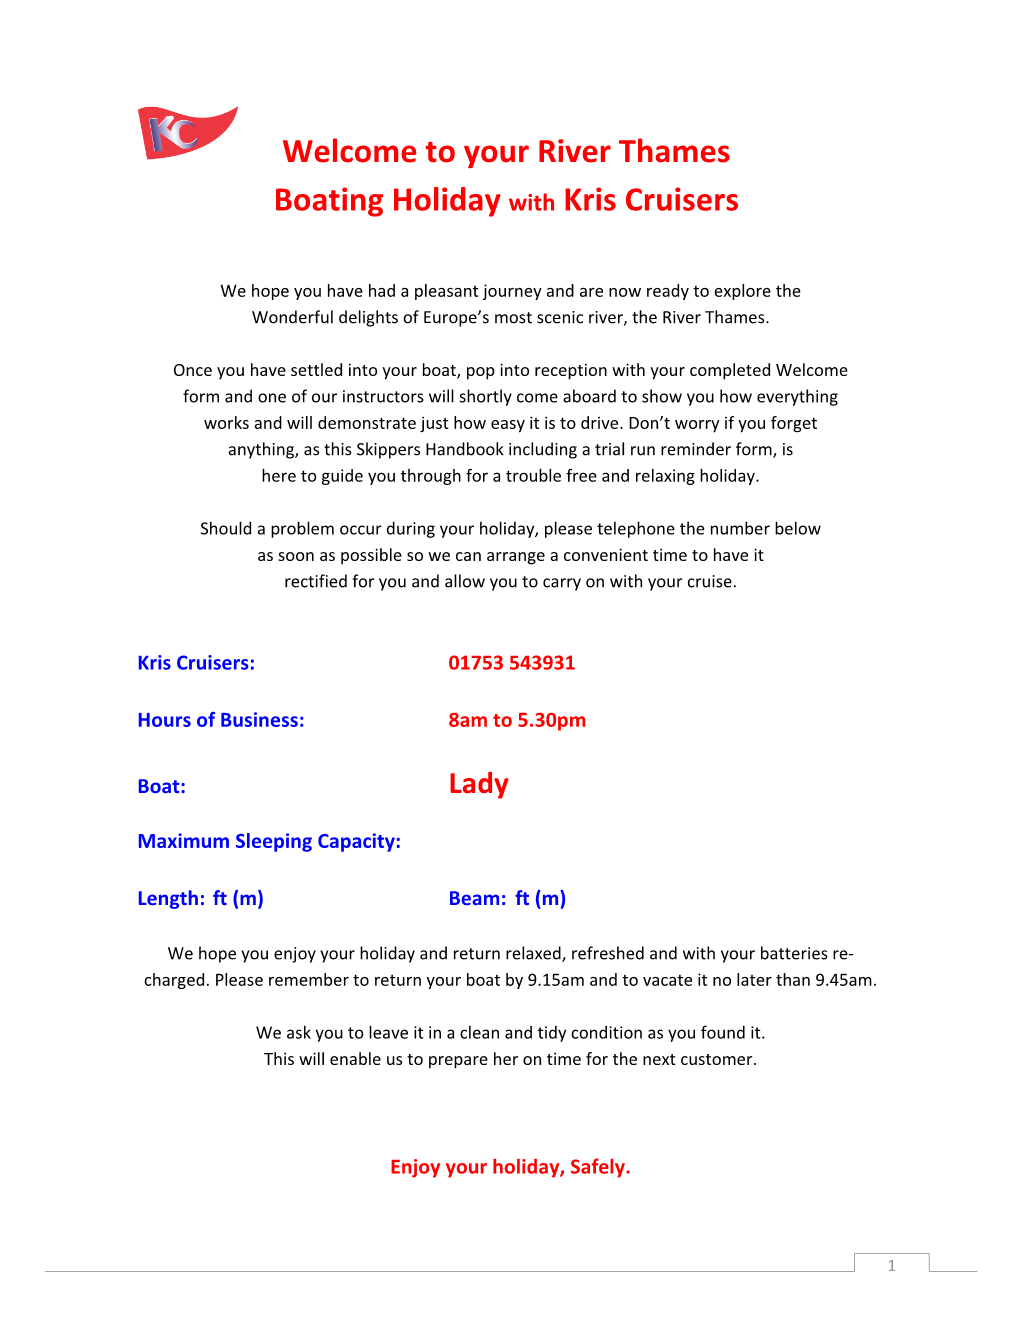 Welcome to Your River Thames Boating Holiday with Kris Cruisers